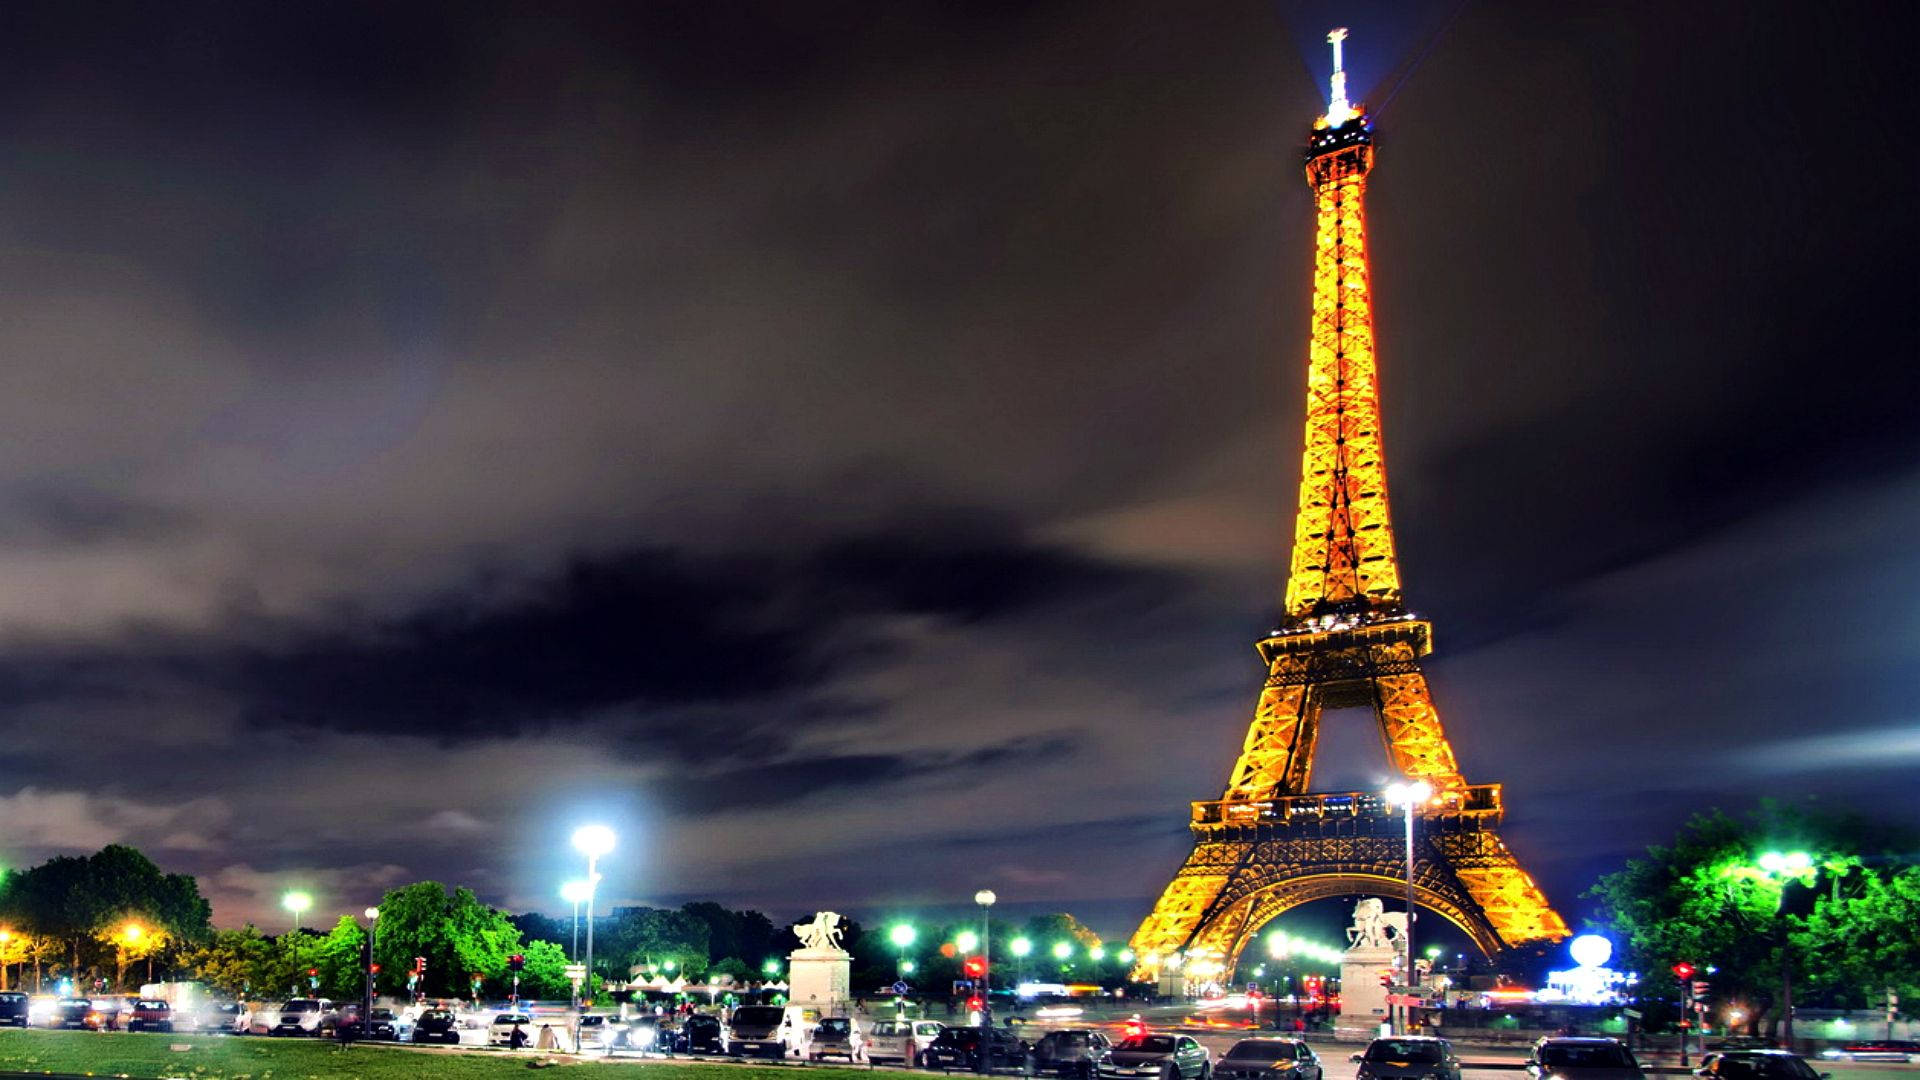 The Eiffel Tower lit up at night Wallpaper